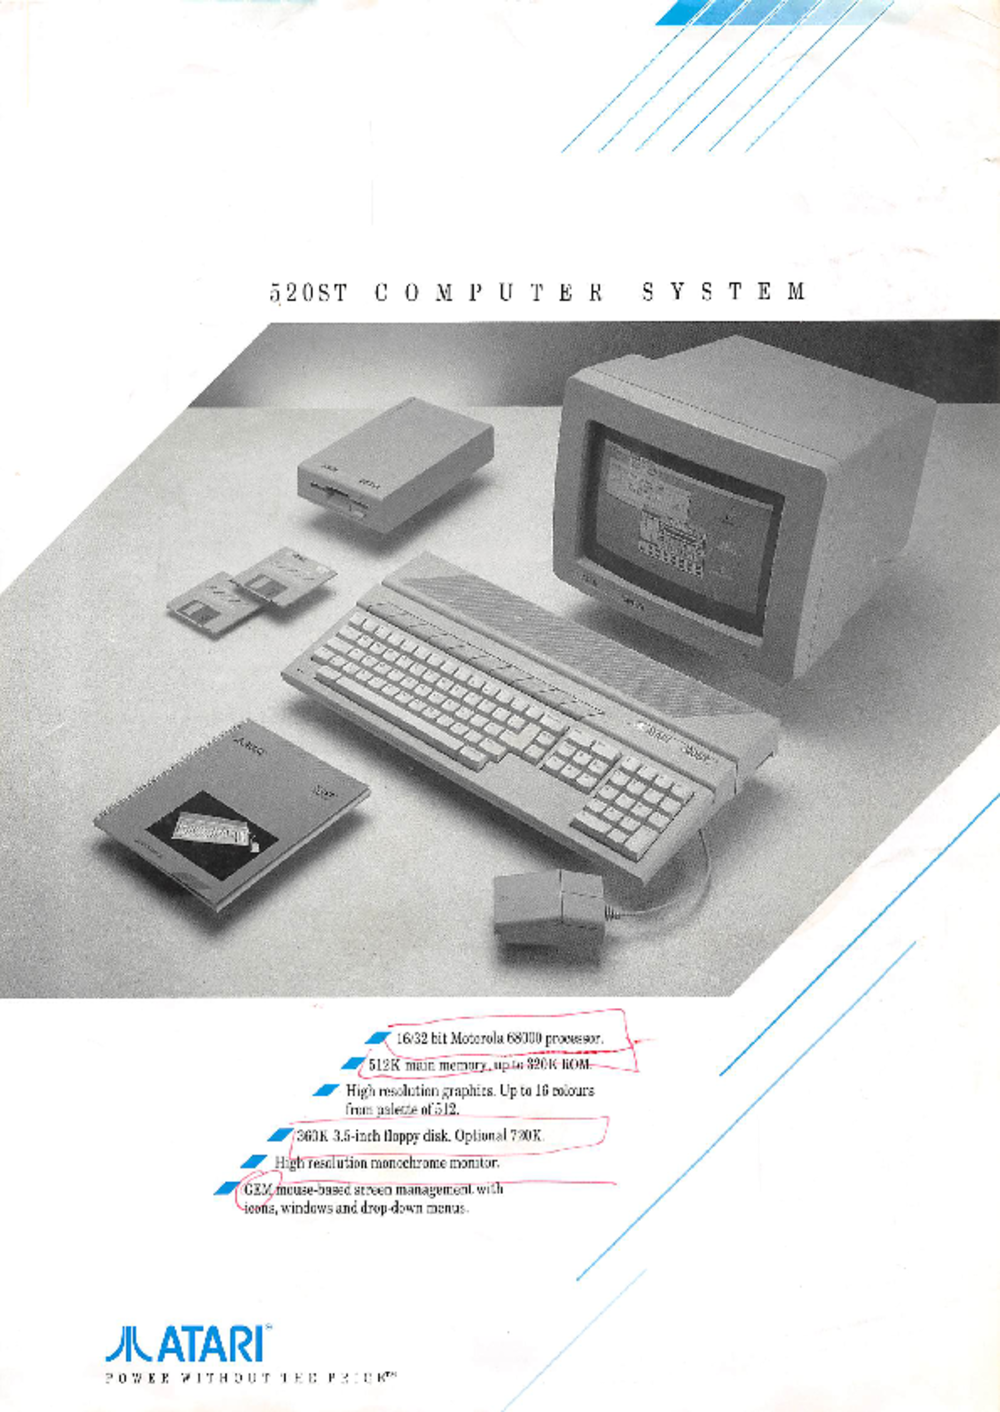 Article: Atari 520ST Computer System Leaflet